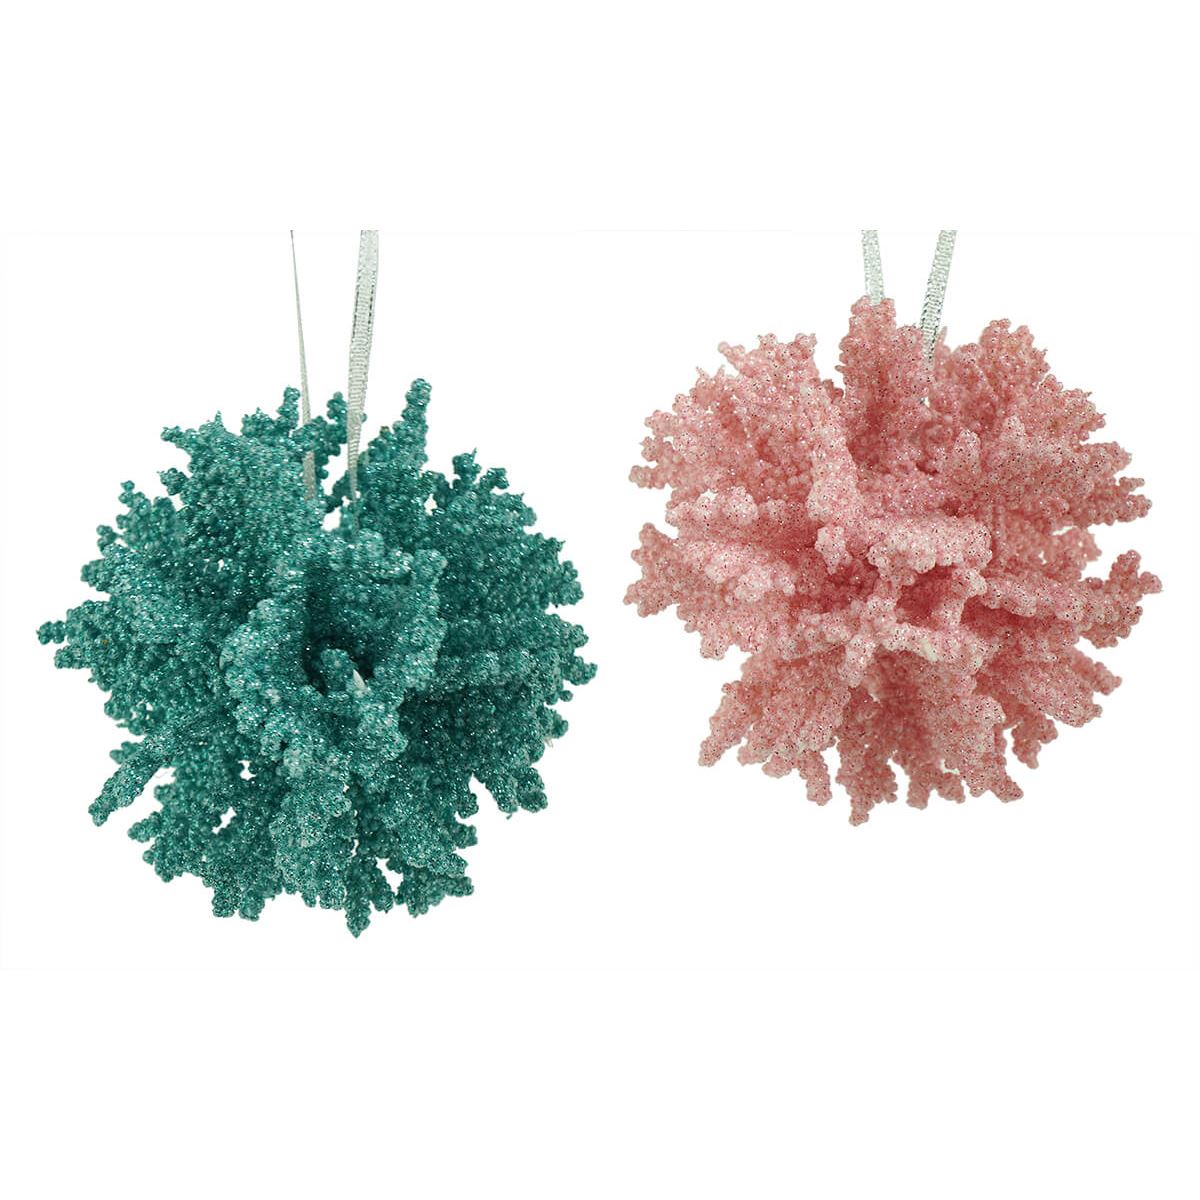 Turquoise & Pink Coral Ball Ornaments Set/2